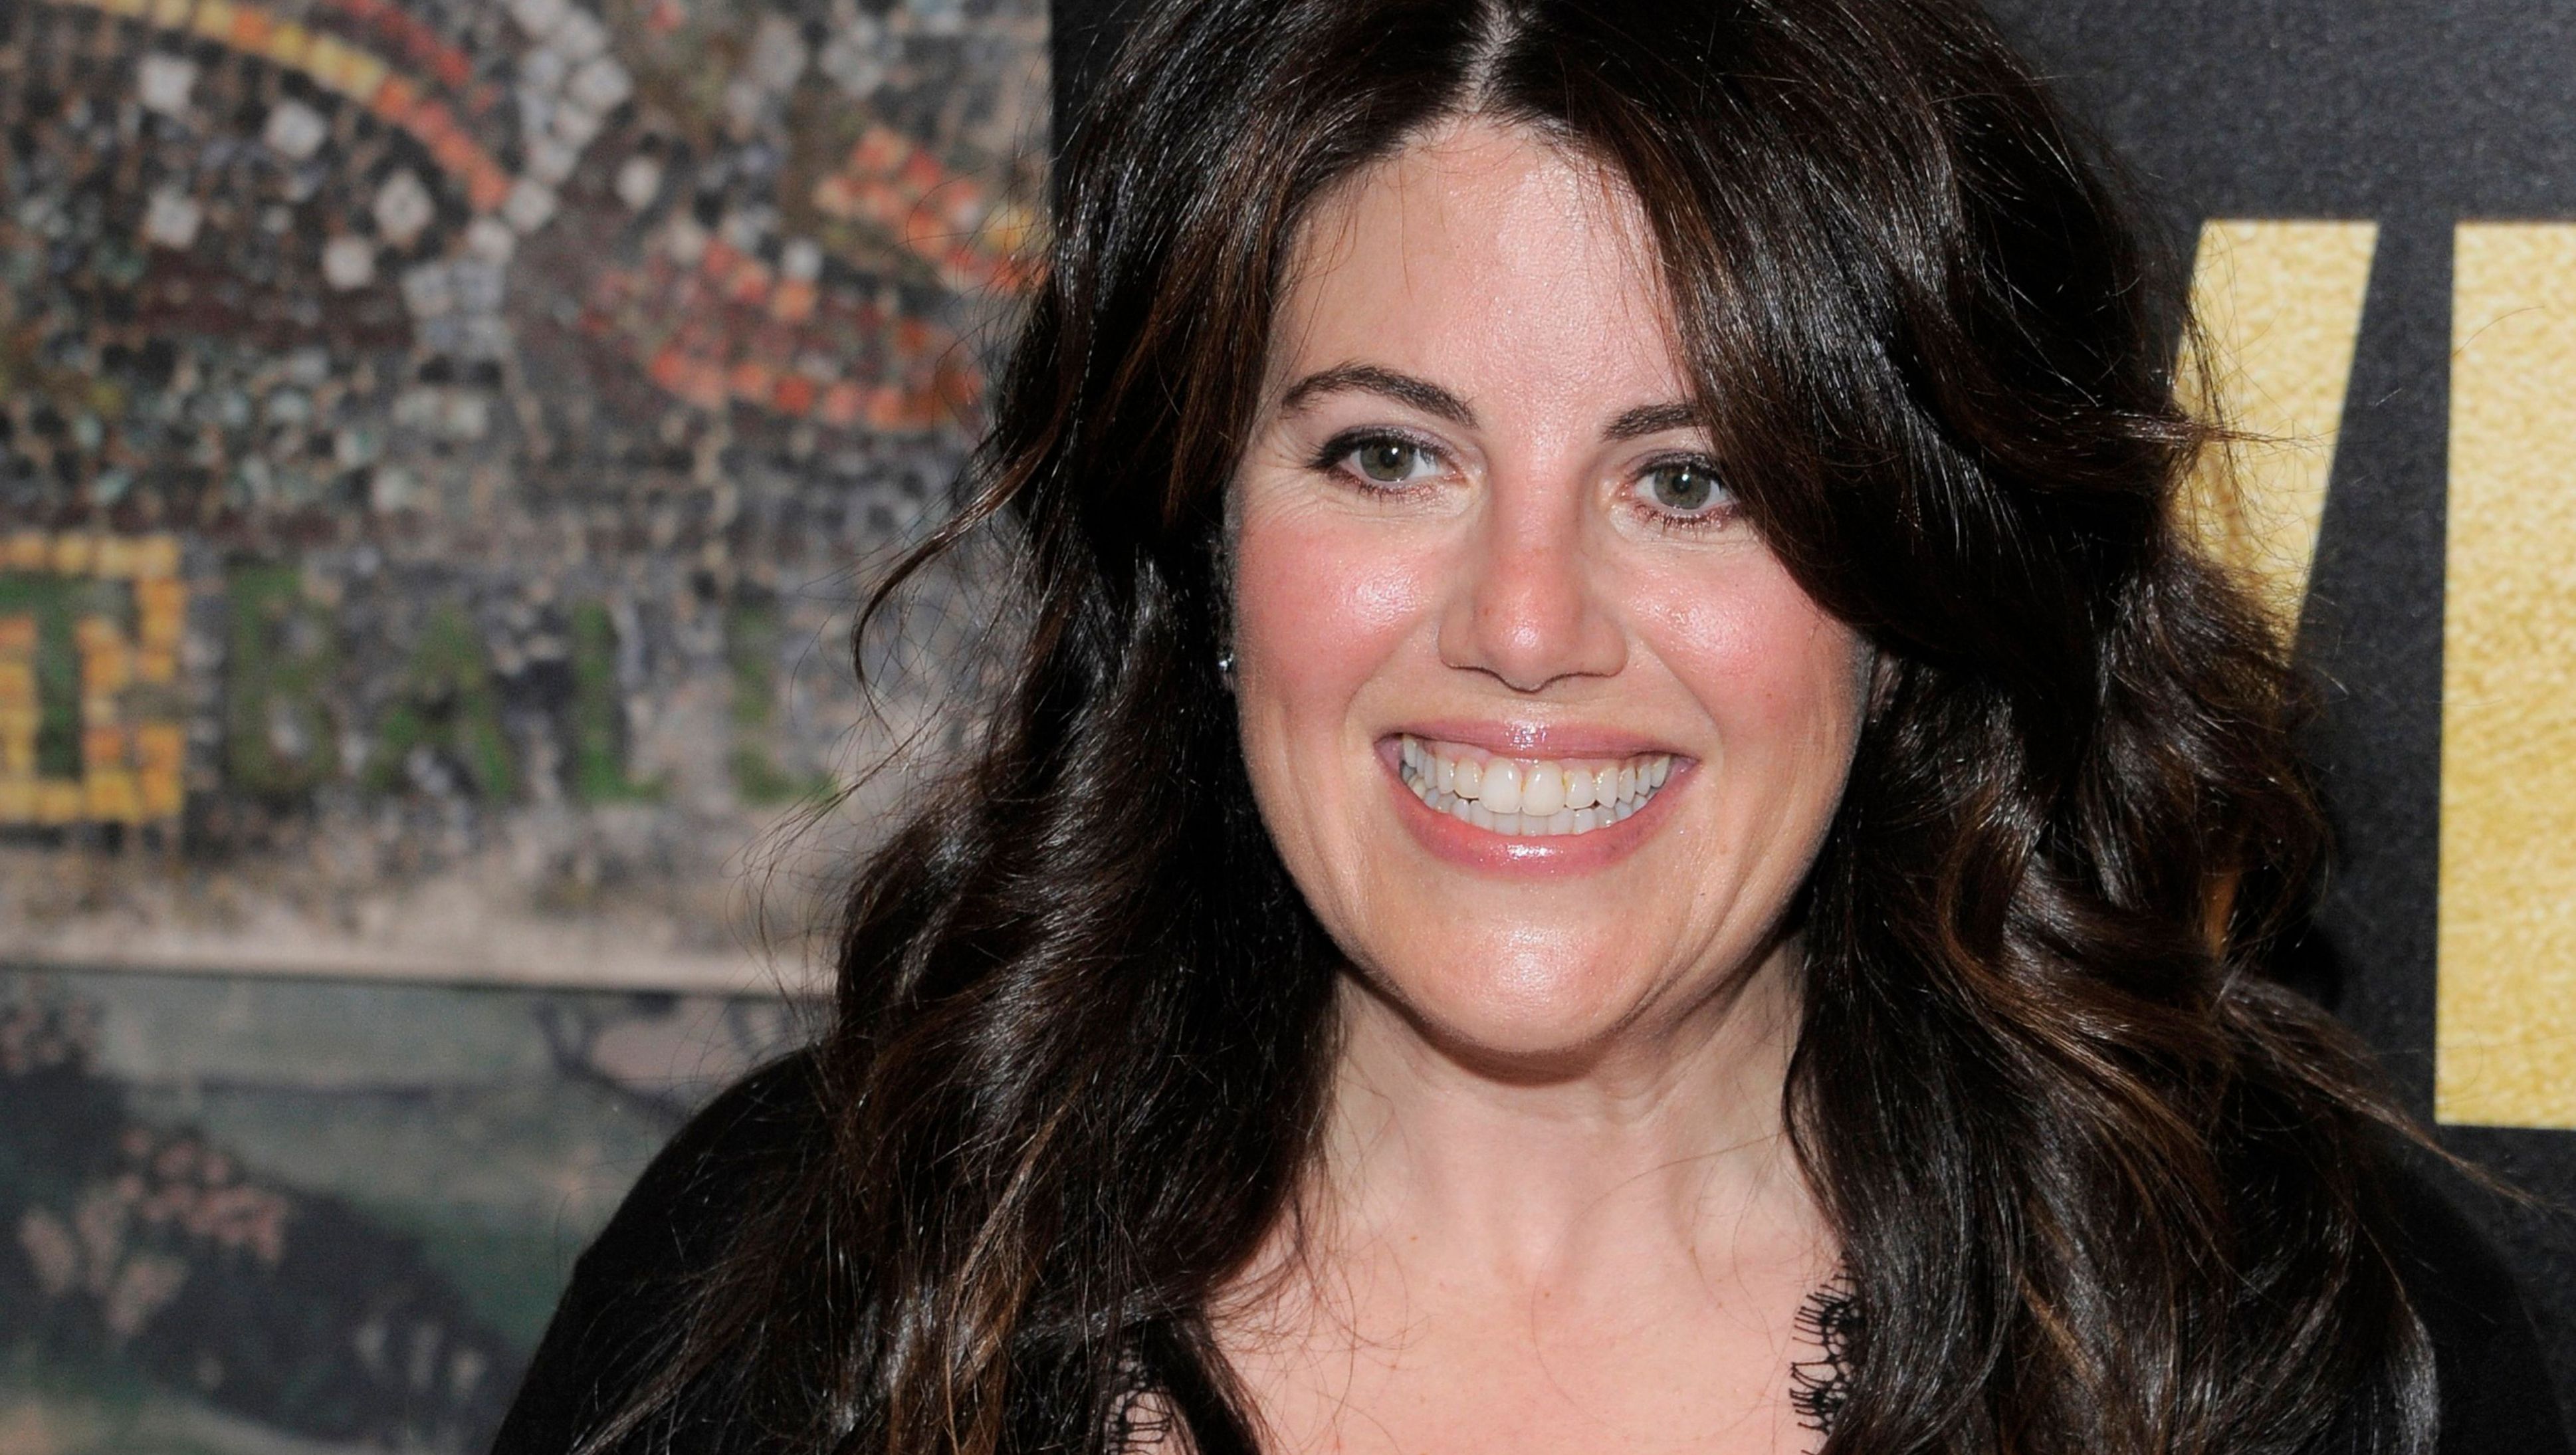 Monica Lewinsky smiles with curled hair.